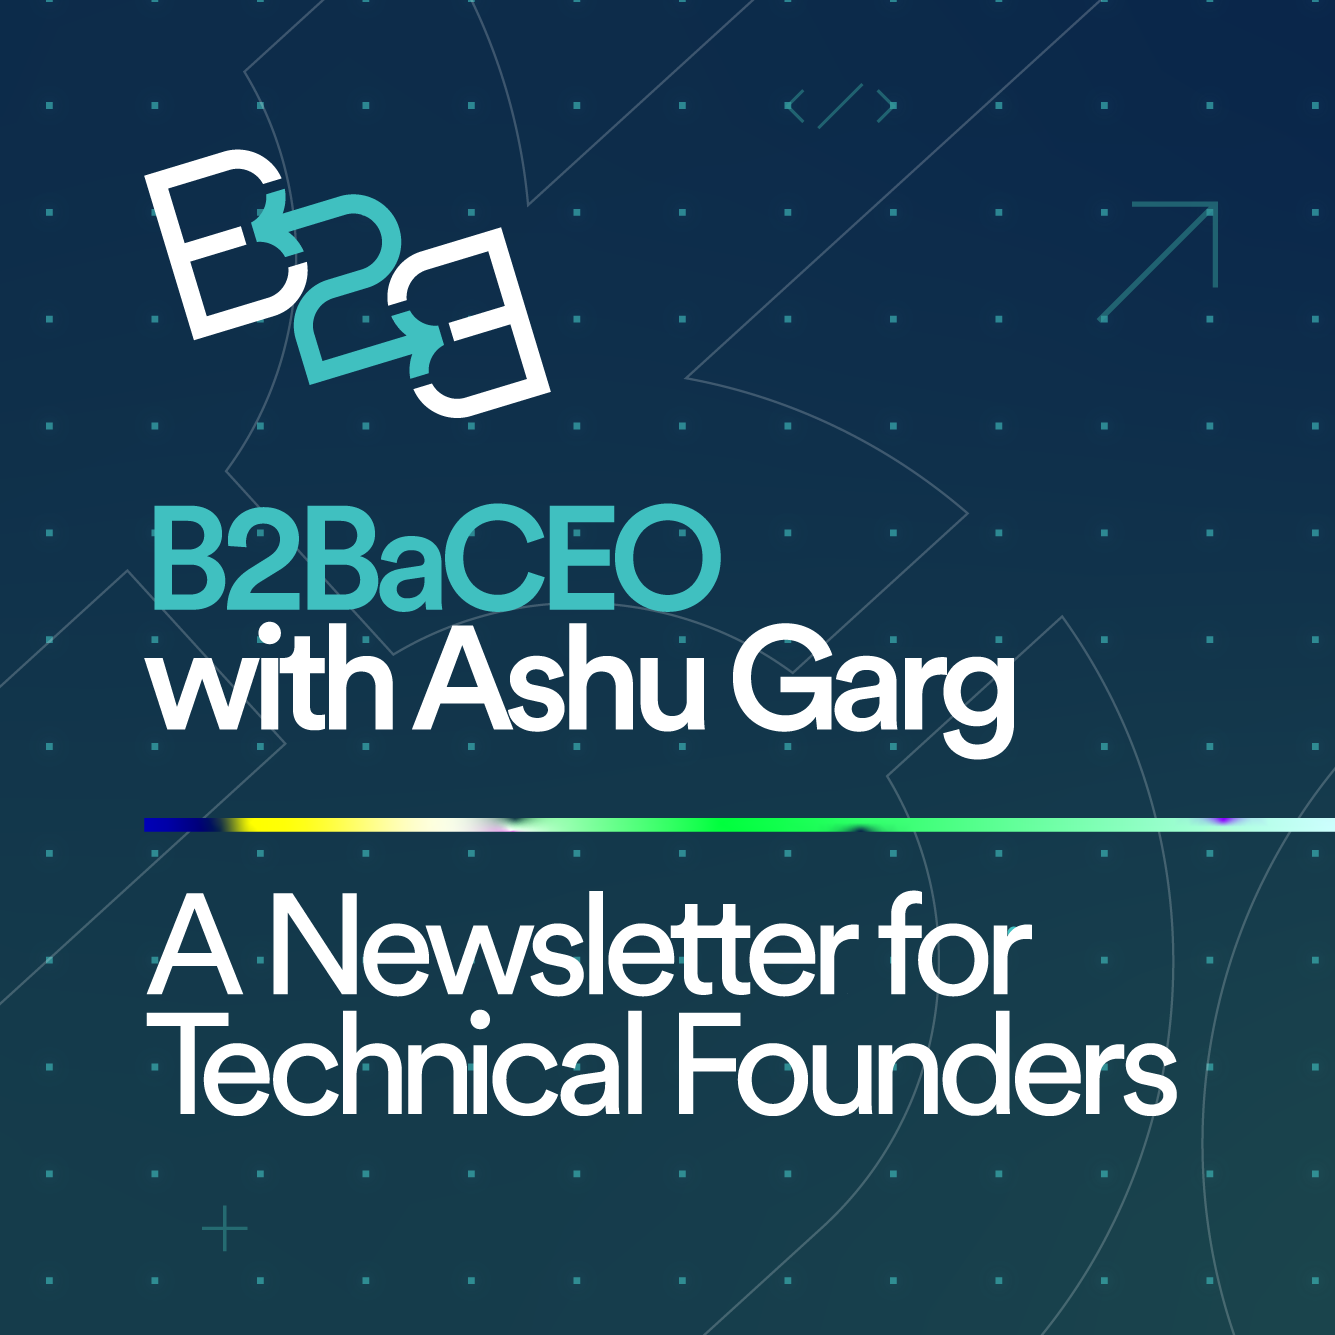 B2BaCEO with Ashu Garg, a newsletter for technical founders